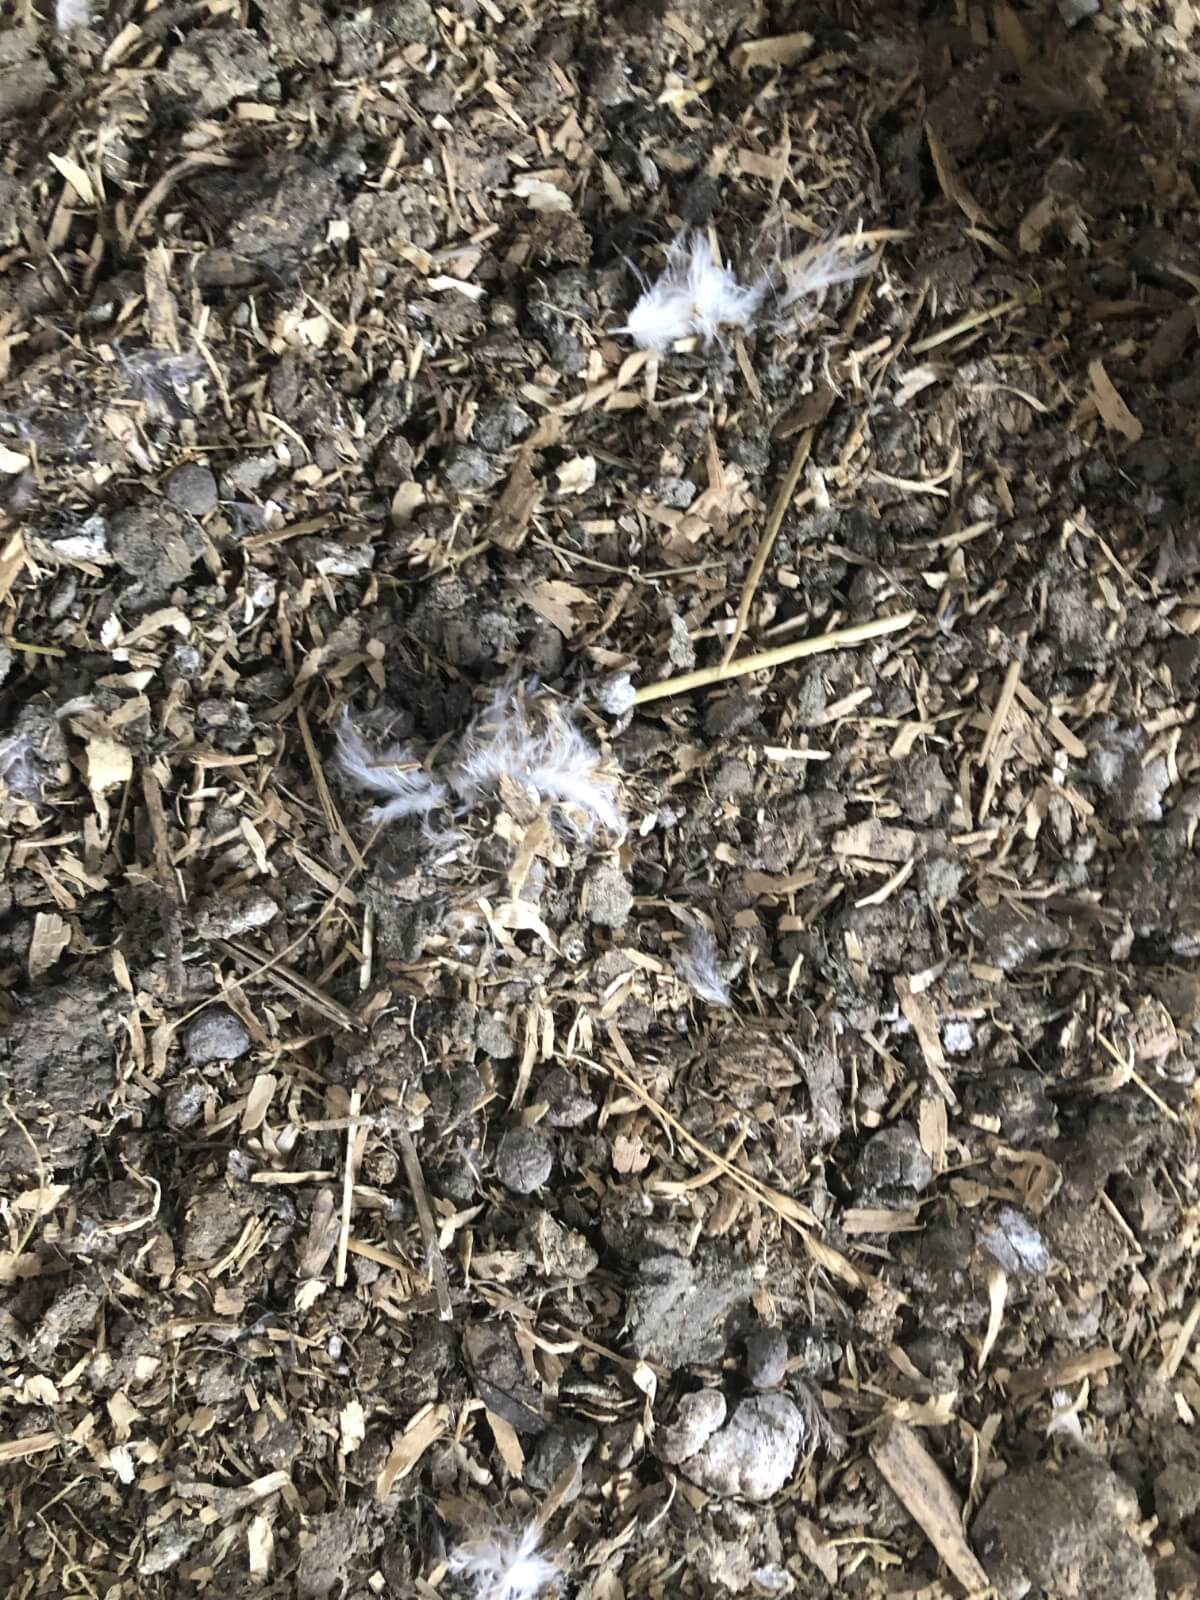 chicken manure with feathers and bedding